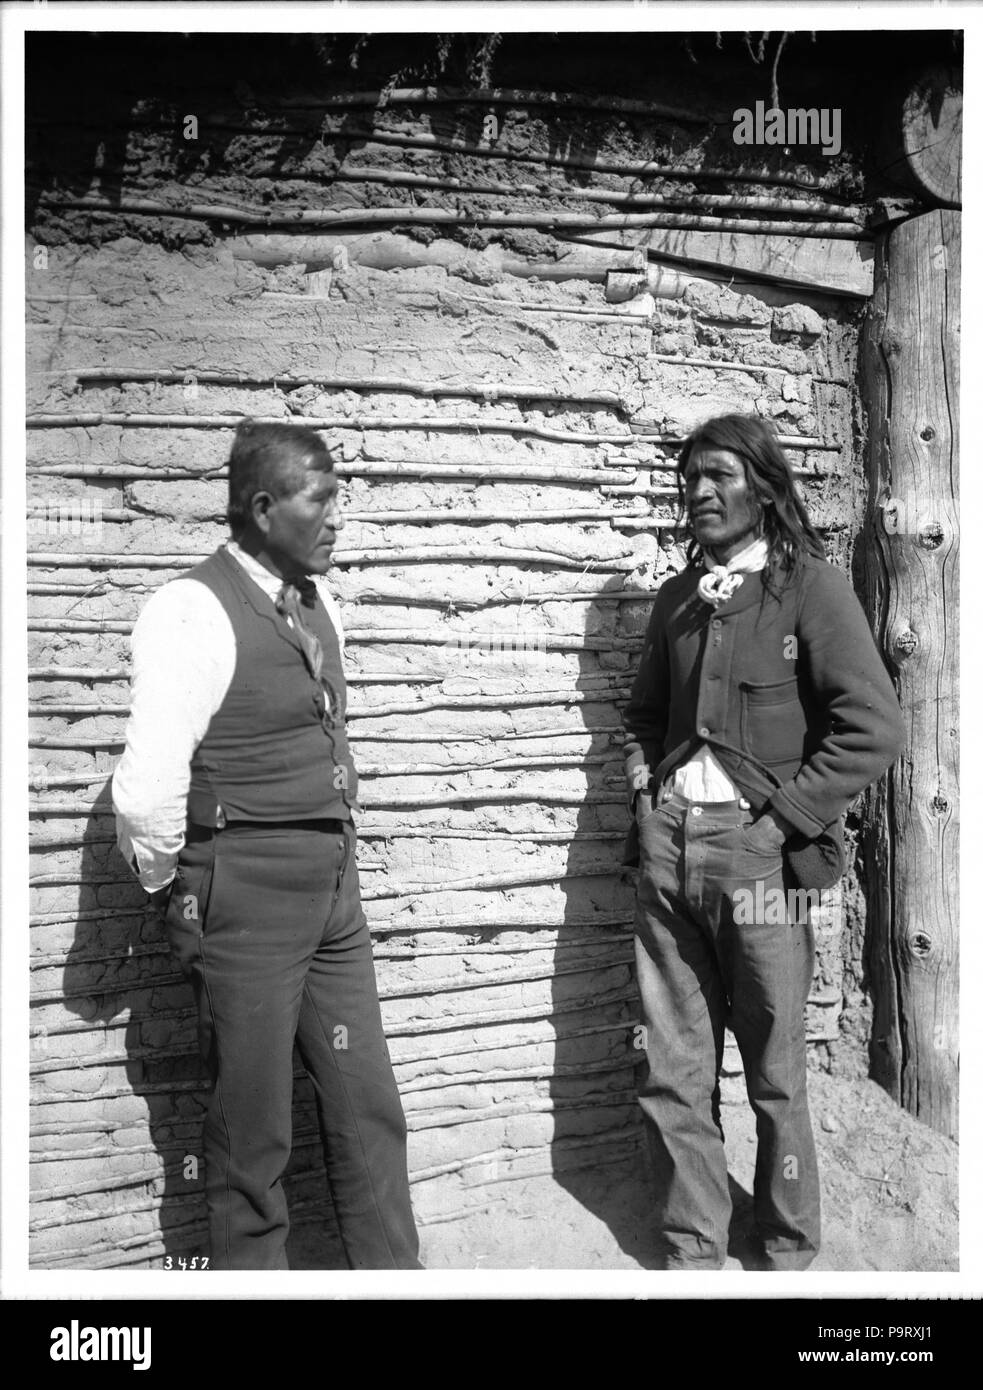 . English: Chief of the 'Friendly' Yuma Indians, John Townsend, and the interpreter, Poncho Lachero, ca.1900 Photograph of the Chief of the 'Friendly' Yuma Indians, John Townsend, and the interpreter, Poncho Lachero, ca.1900. They stand facing one another in front of the wall of a stick and mud dwelling with a thatched roof. The interpreter, with short hair, on the left, stands with his hands clasped behind his back. He is wearing a vest over a white shirt, with tie and trousers. The chief, with long hair, at right, stands with his hands thrust in the front pockets of his trousers. He also wea Stock Photo